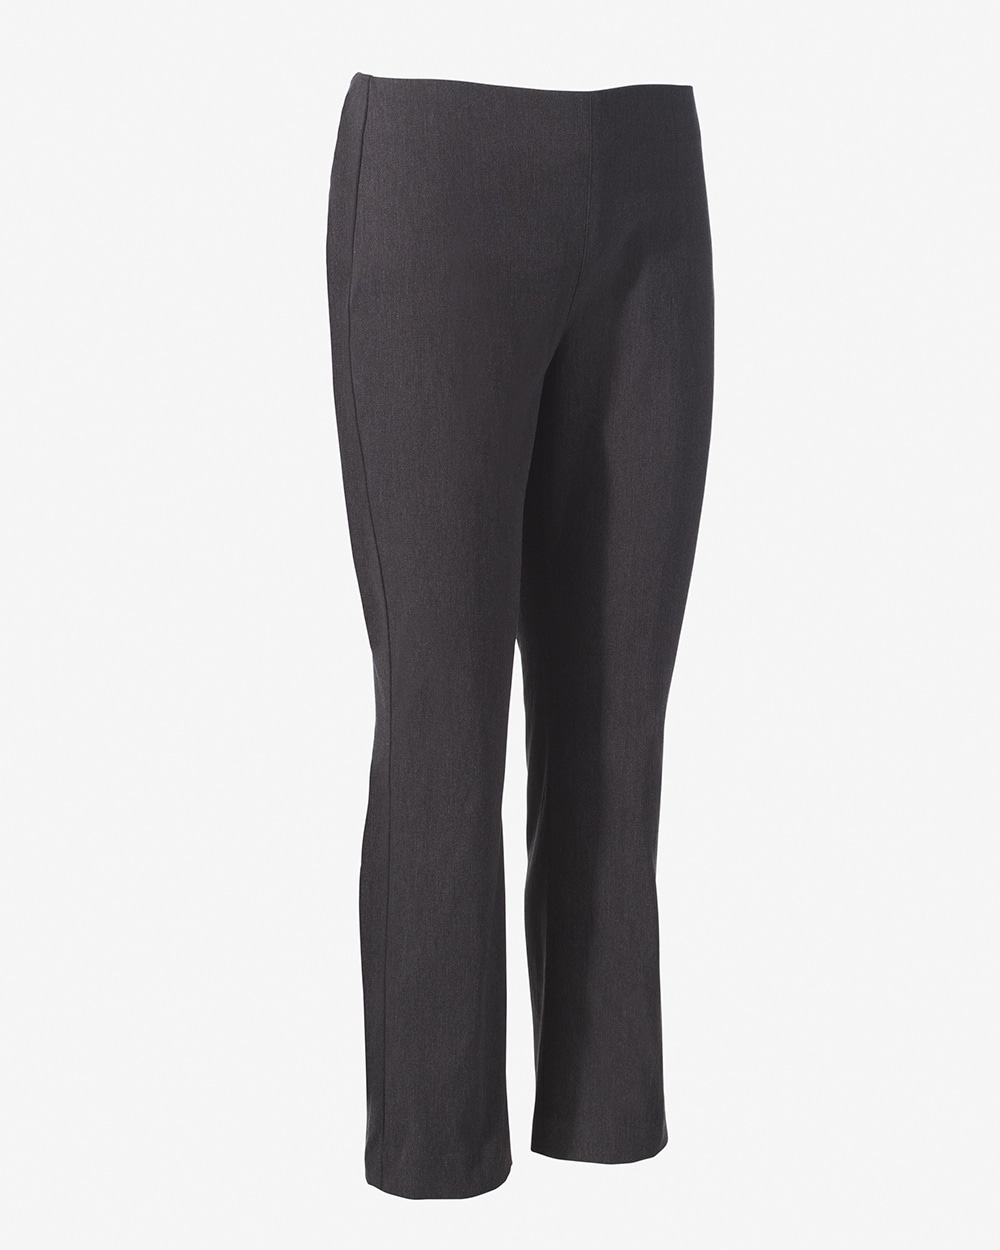 Perfect Stretch Fabulously Slimming Pull-On Ankle Pants